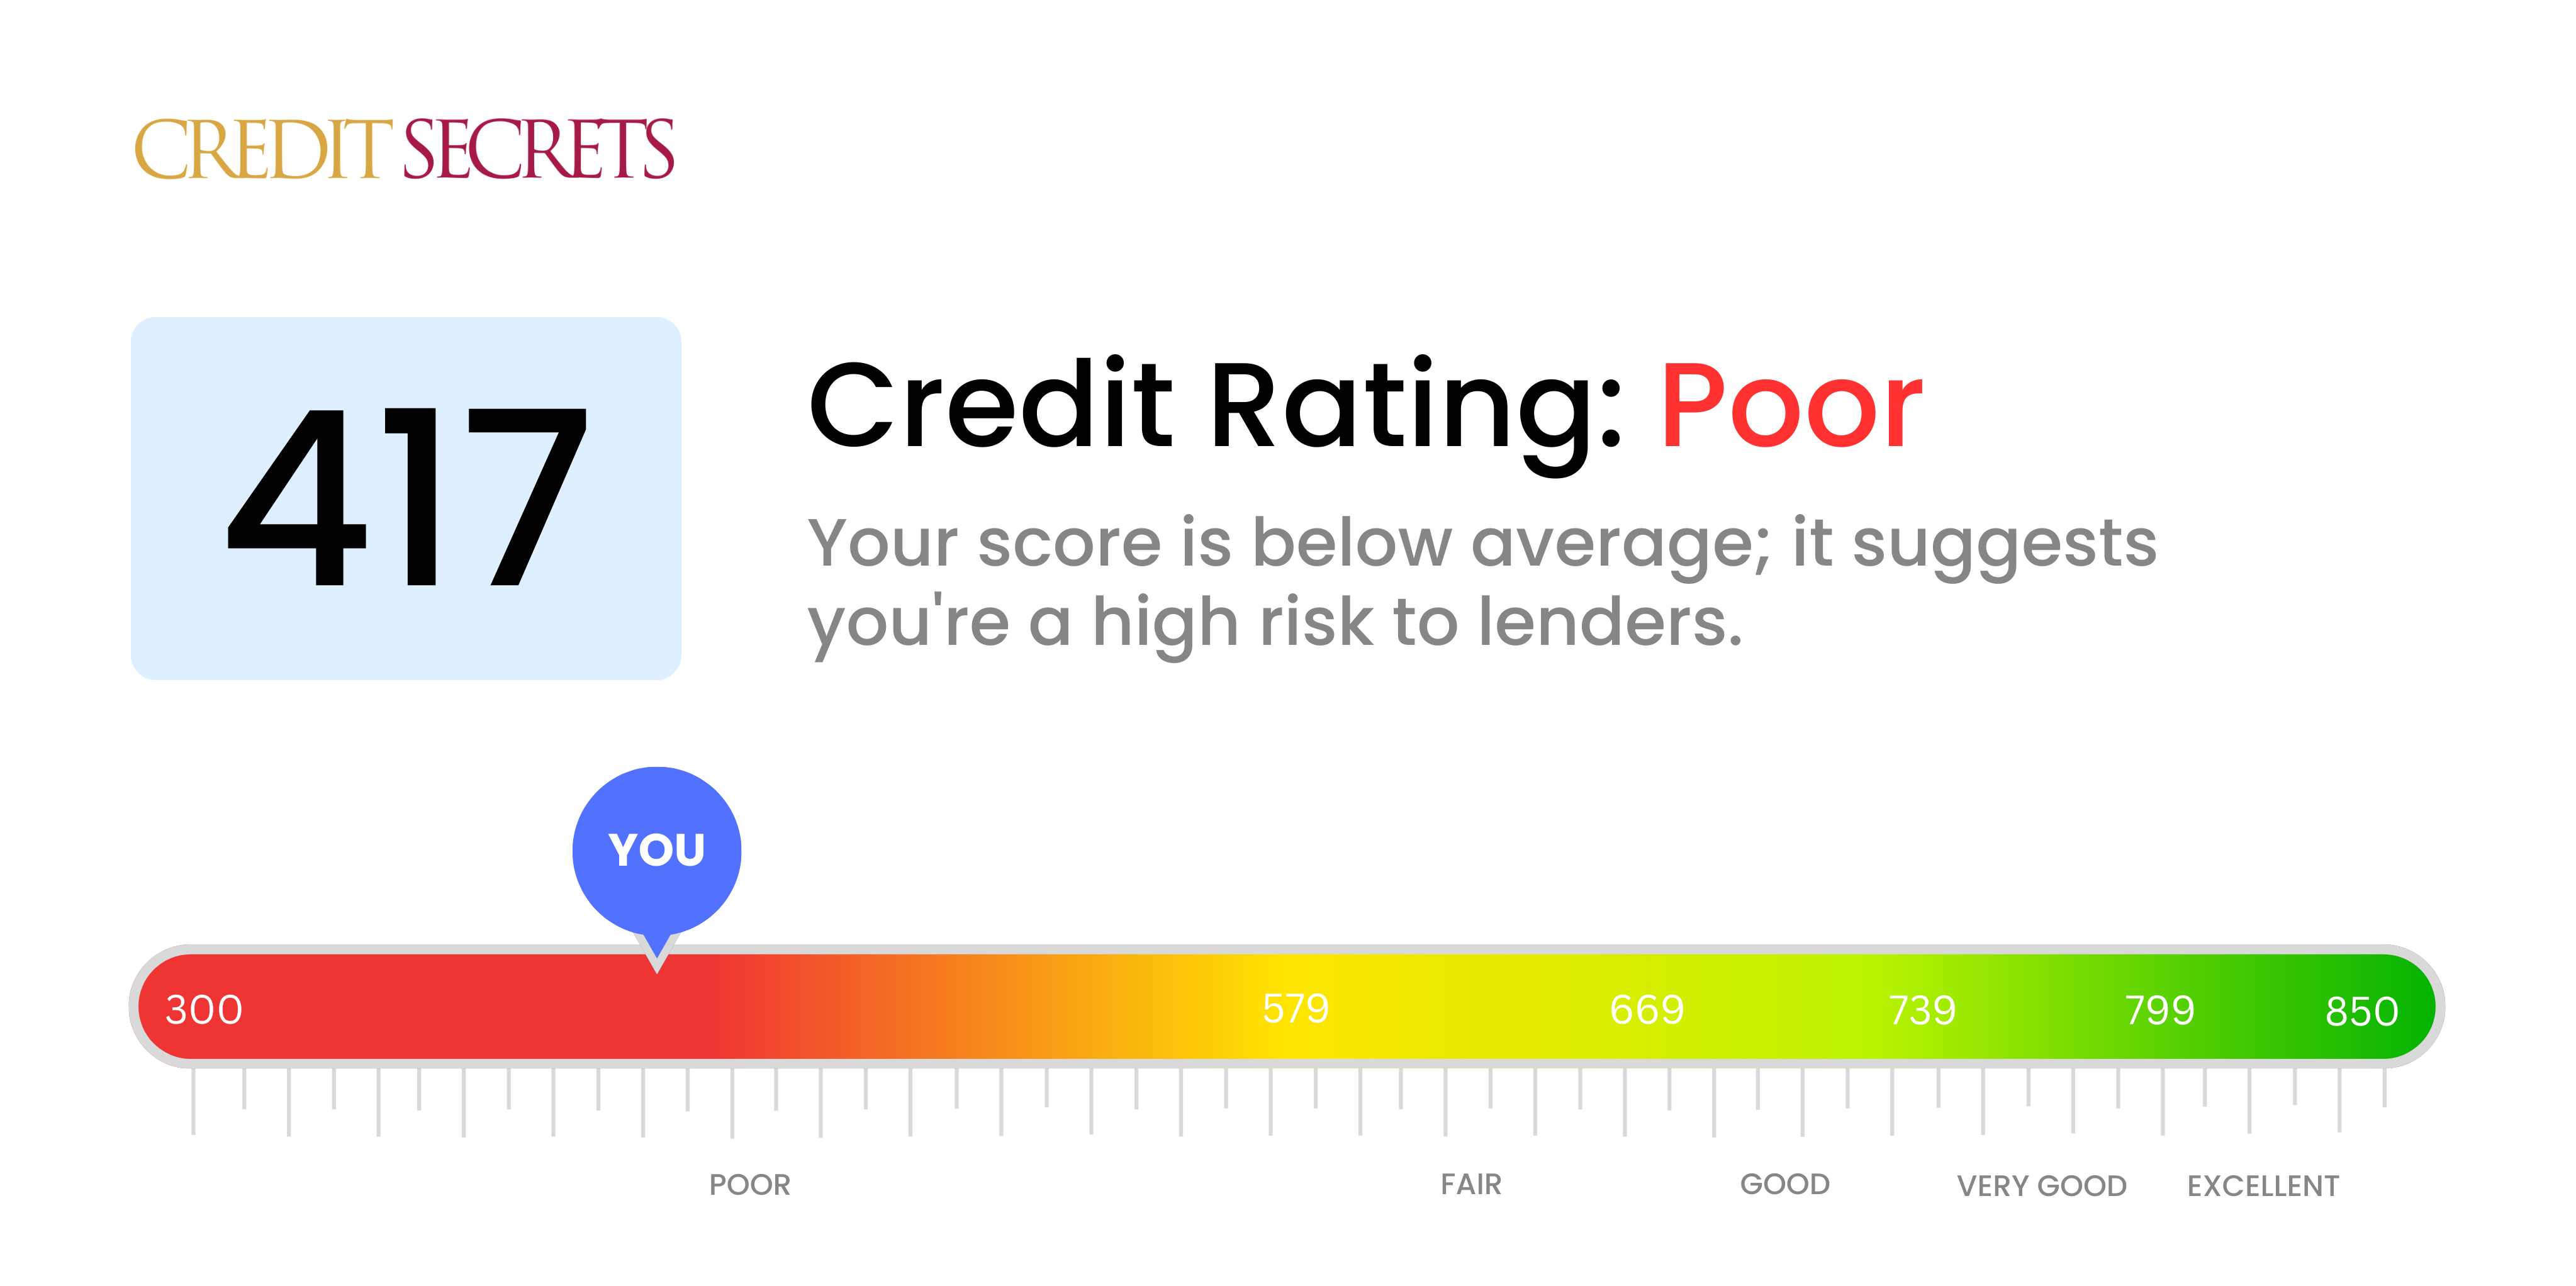 Is 417 a good credit score?